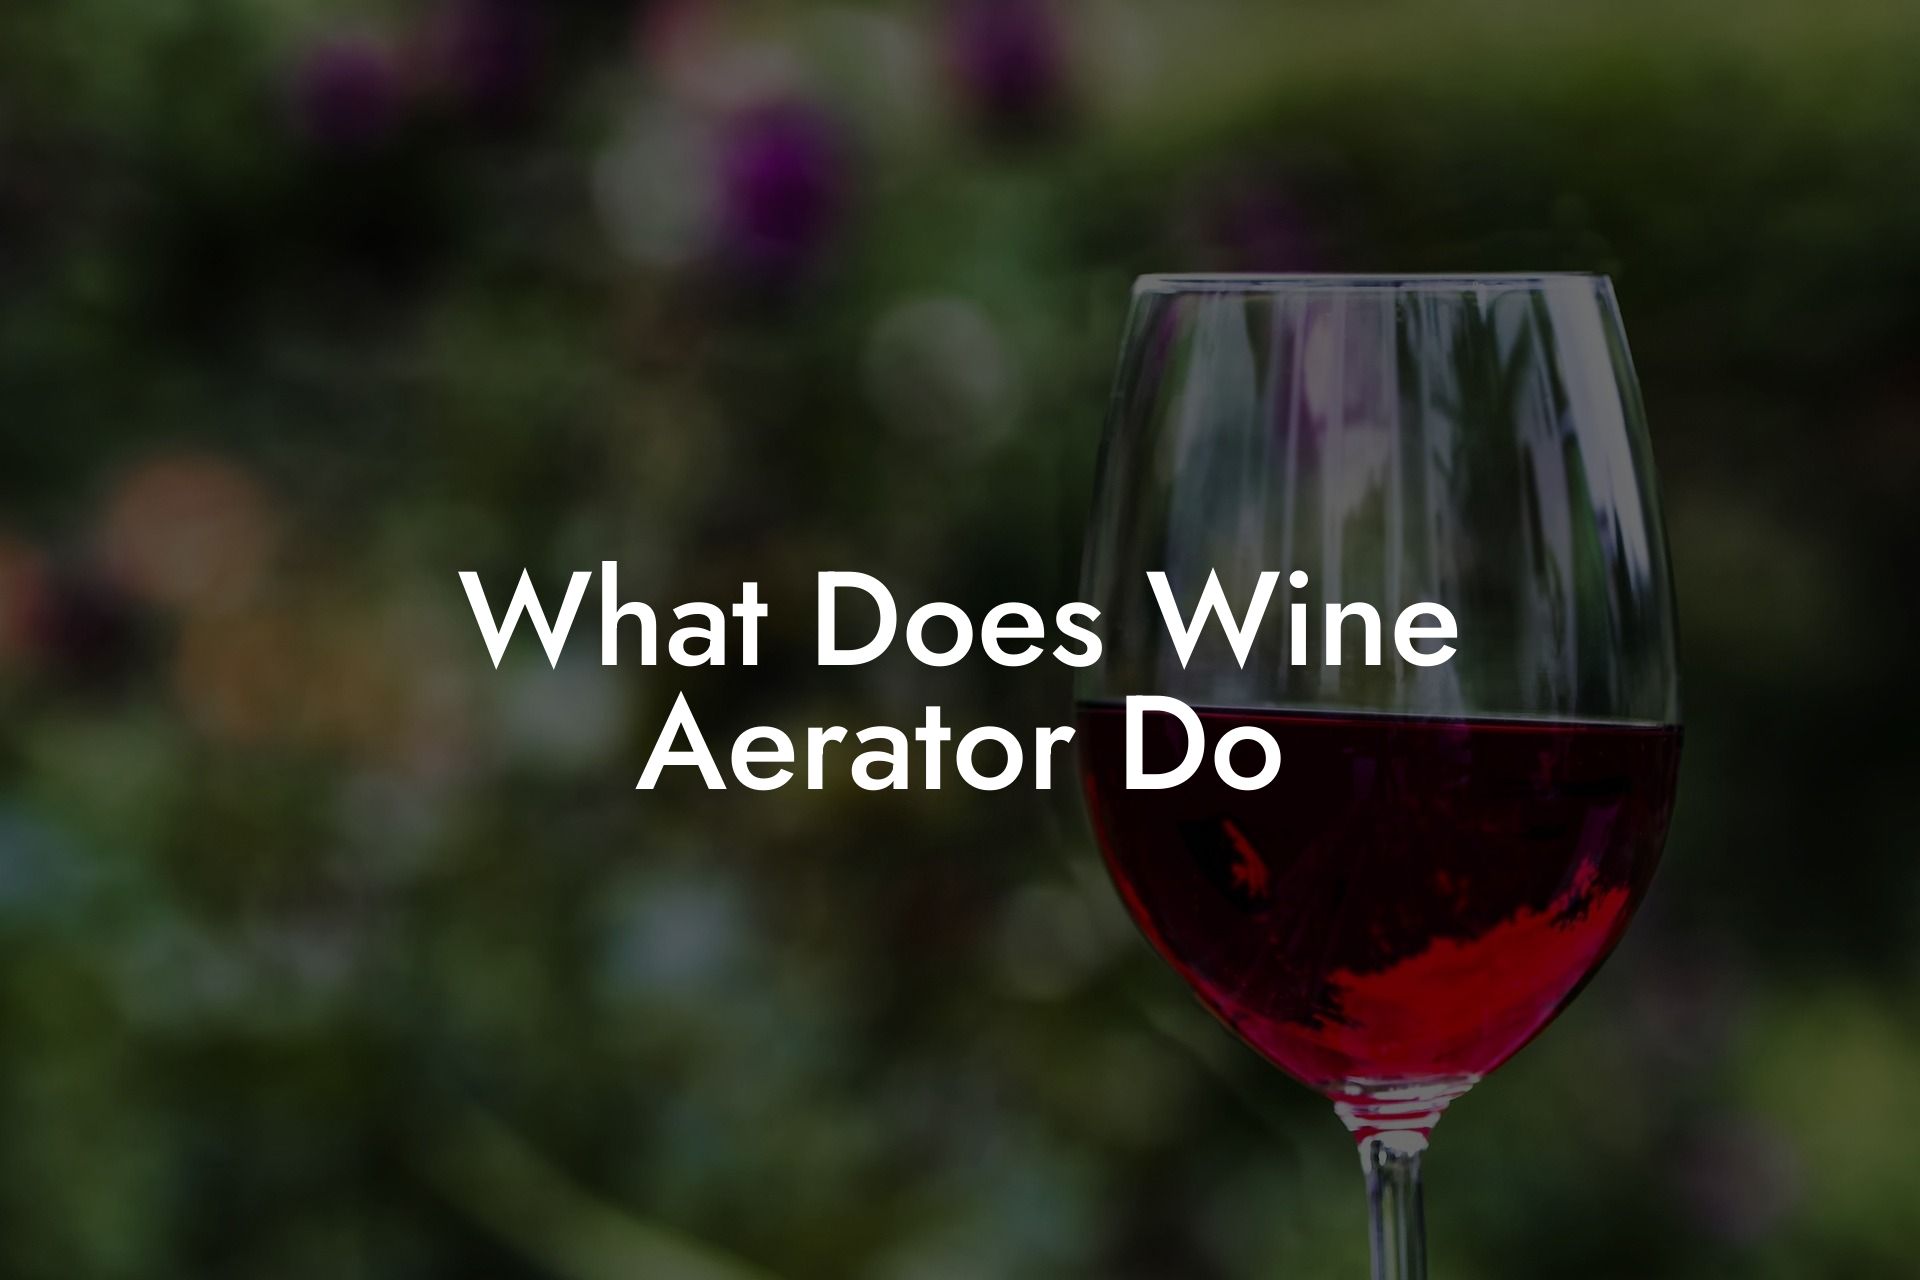 What Does Wine Aerator Do